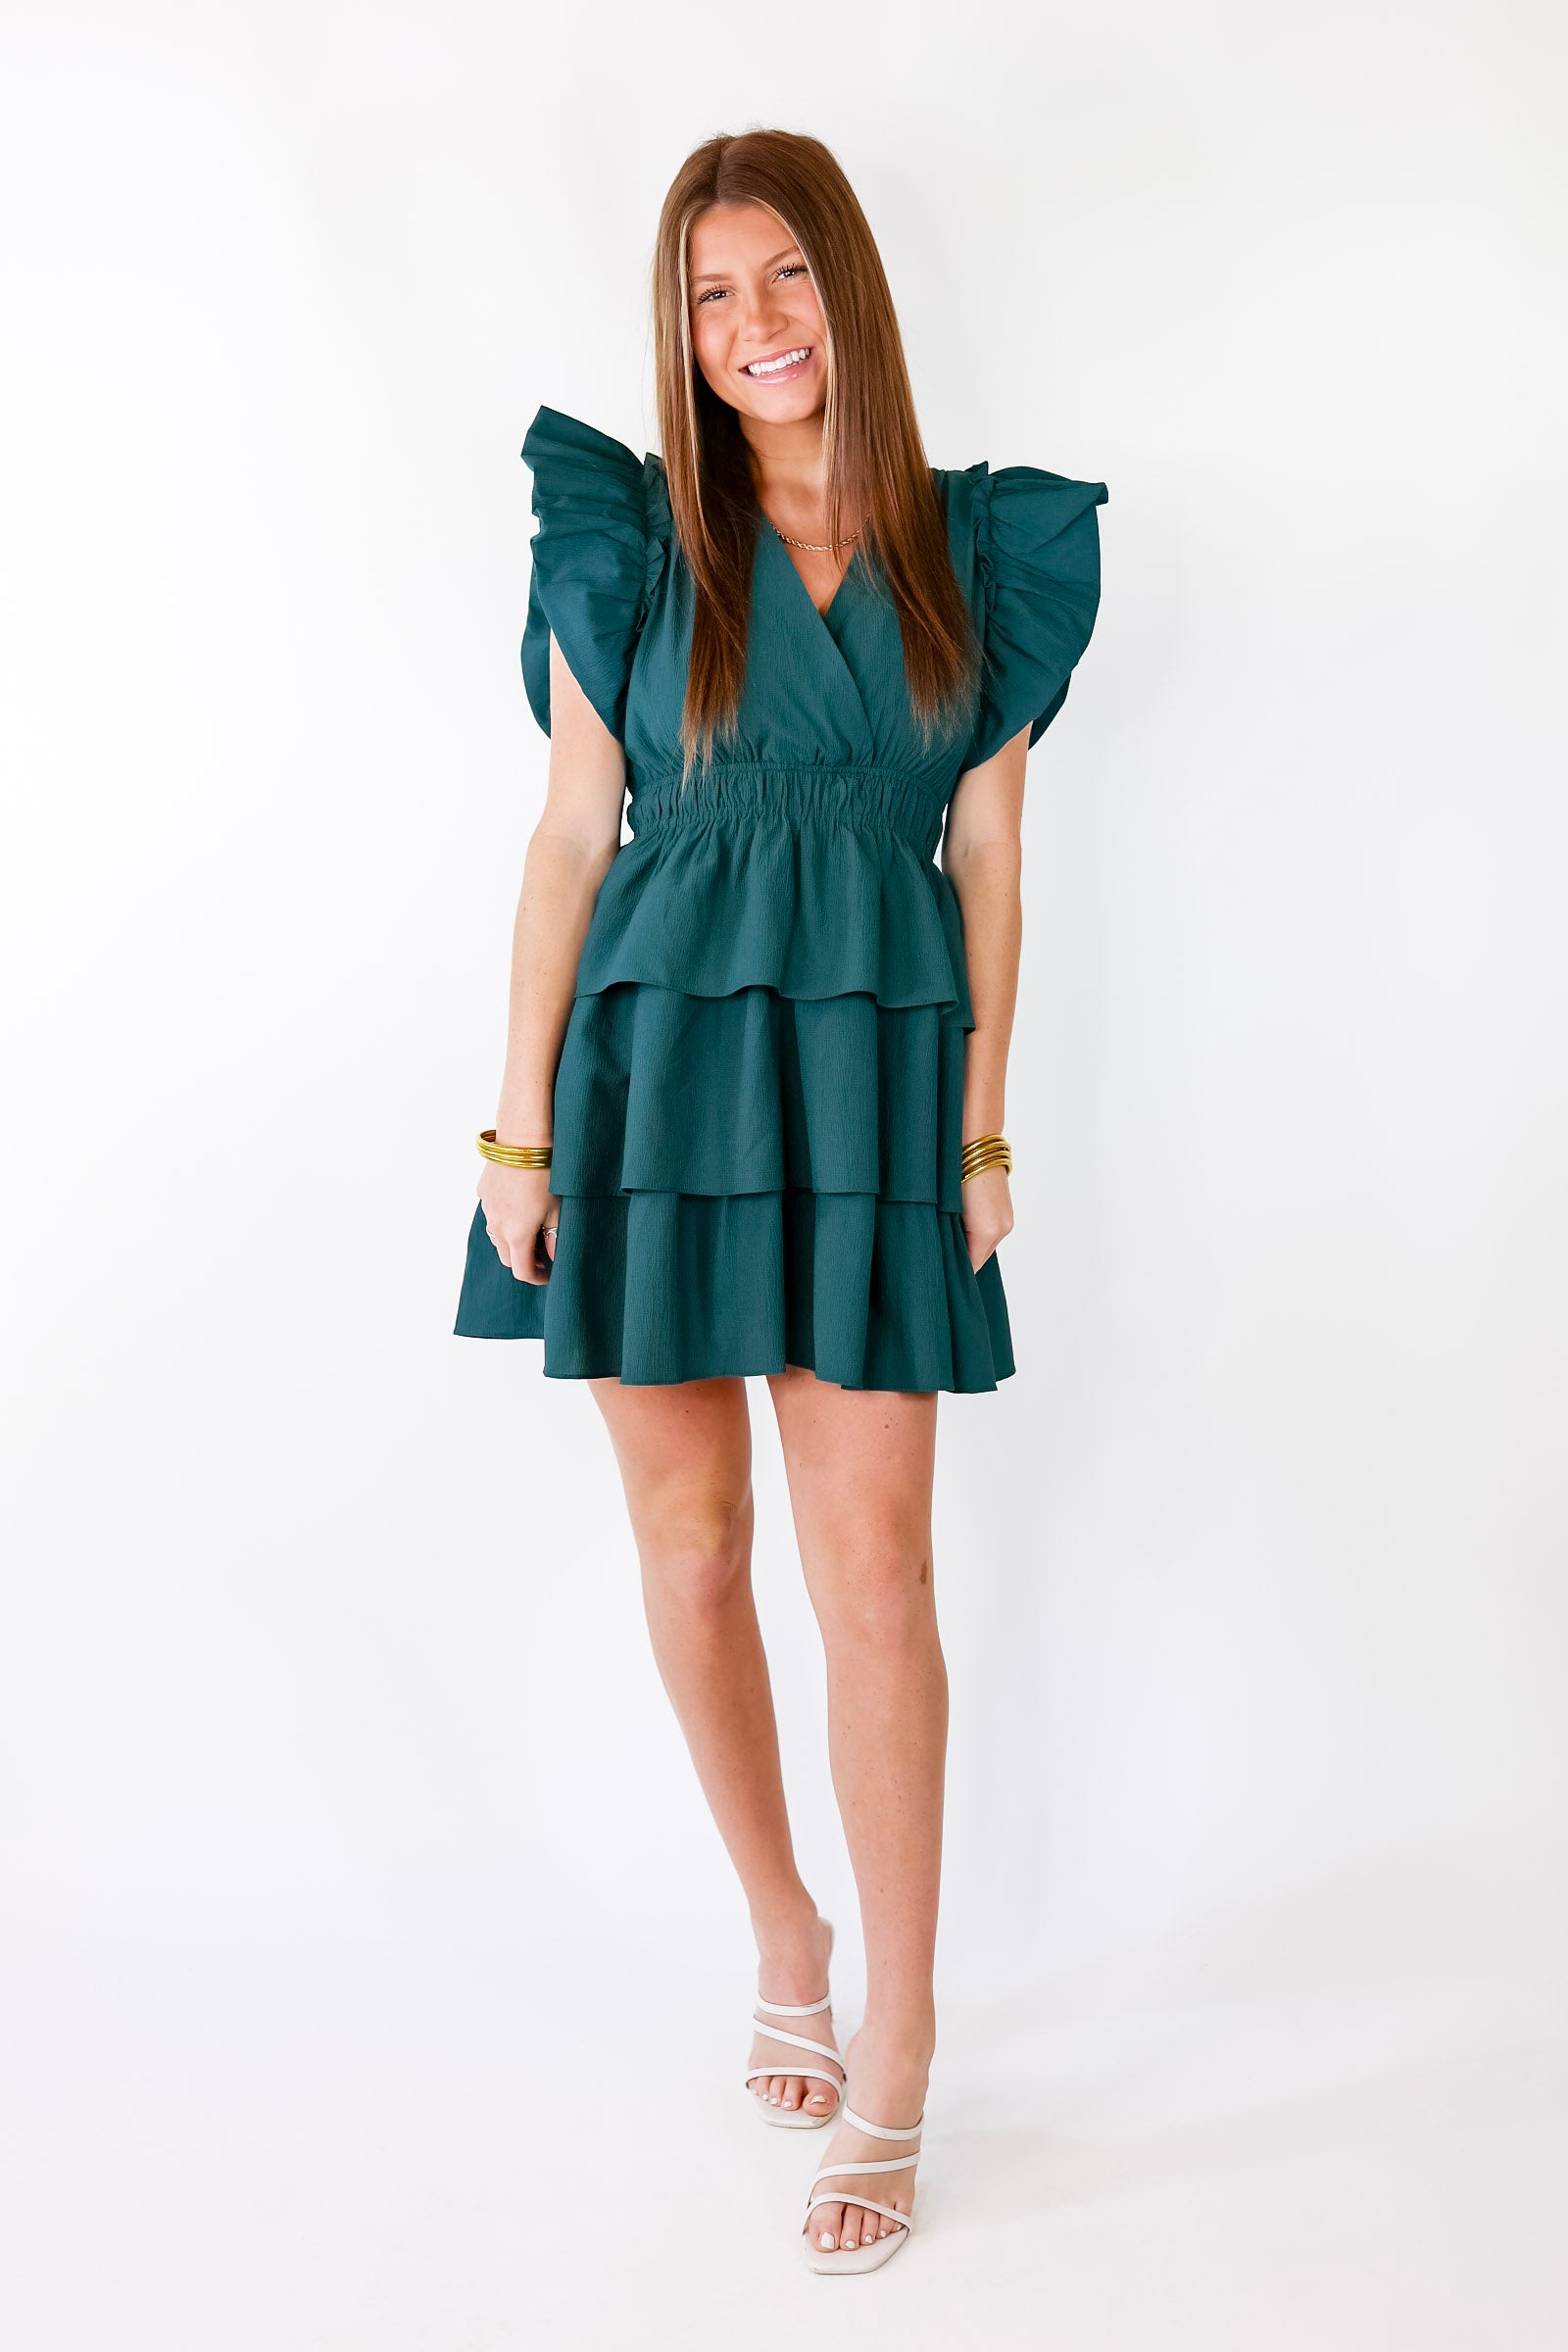 The Perfect Night Ruffle Cap Sleeve Dress in Dark Teal - Giddy Up Glamour Boutique